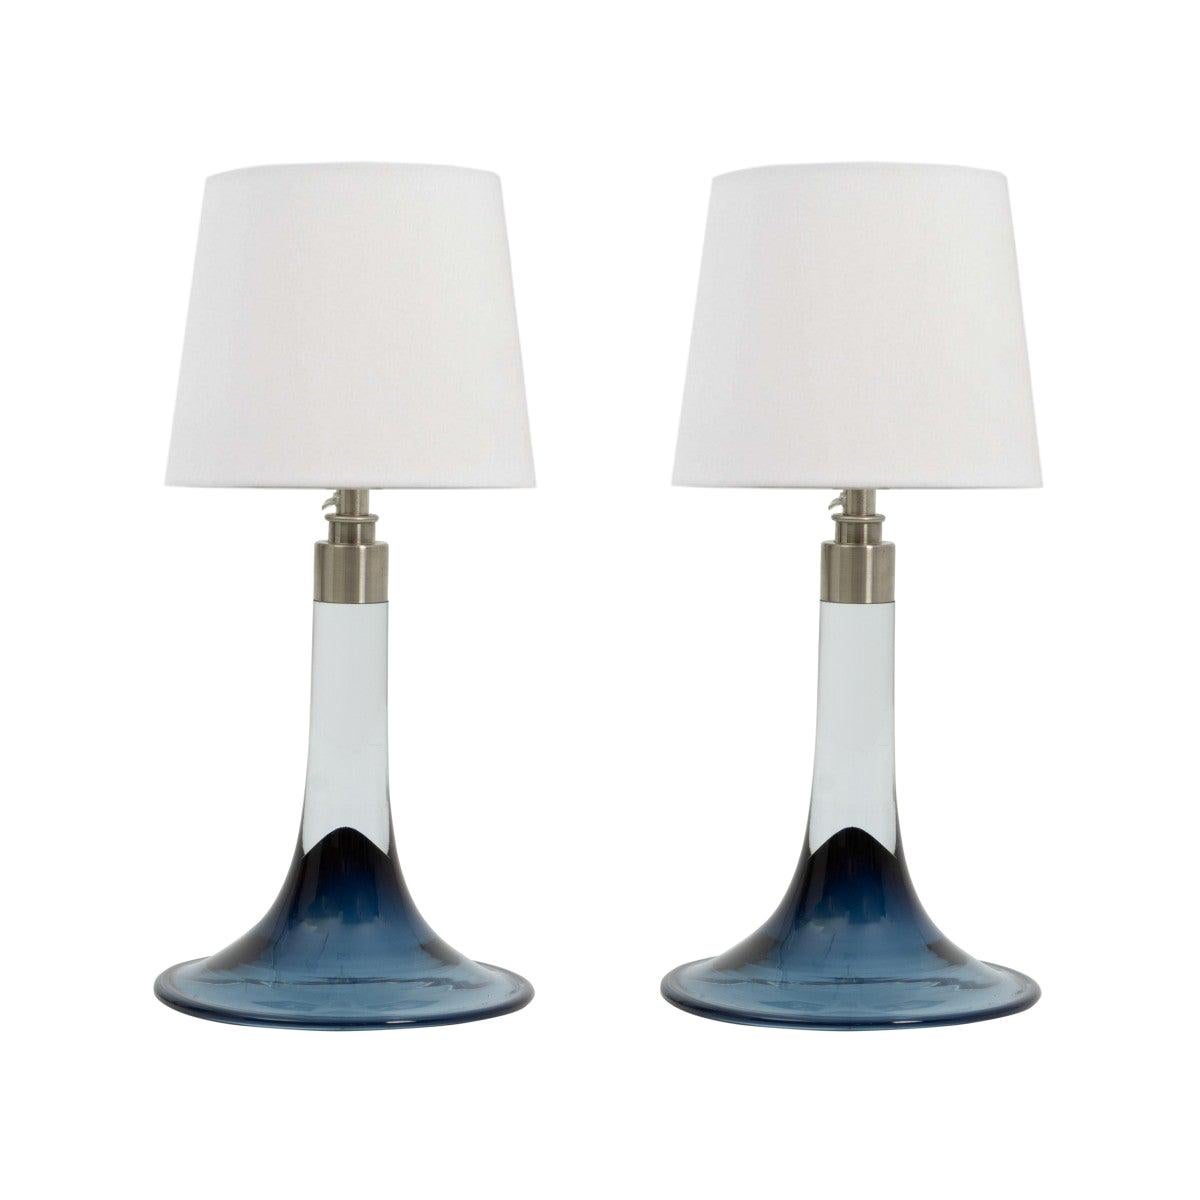 Pair of Midcentury Royal Copenhagen Blue and White Glass Table Lamps